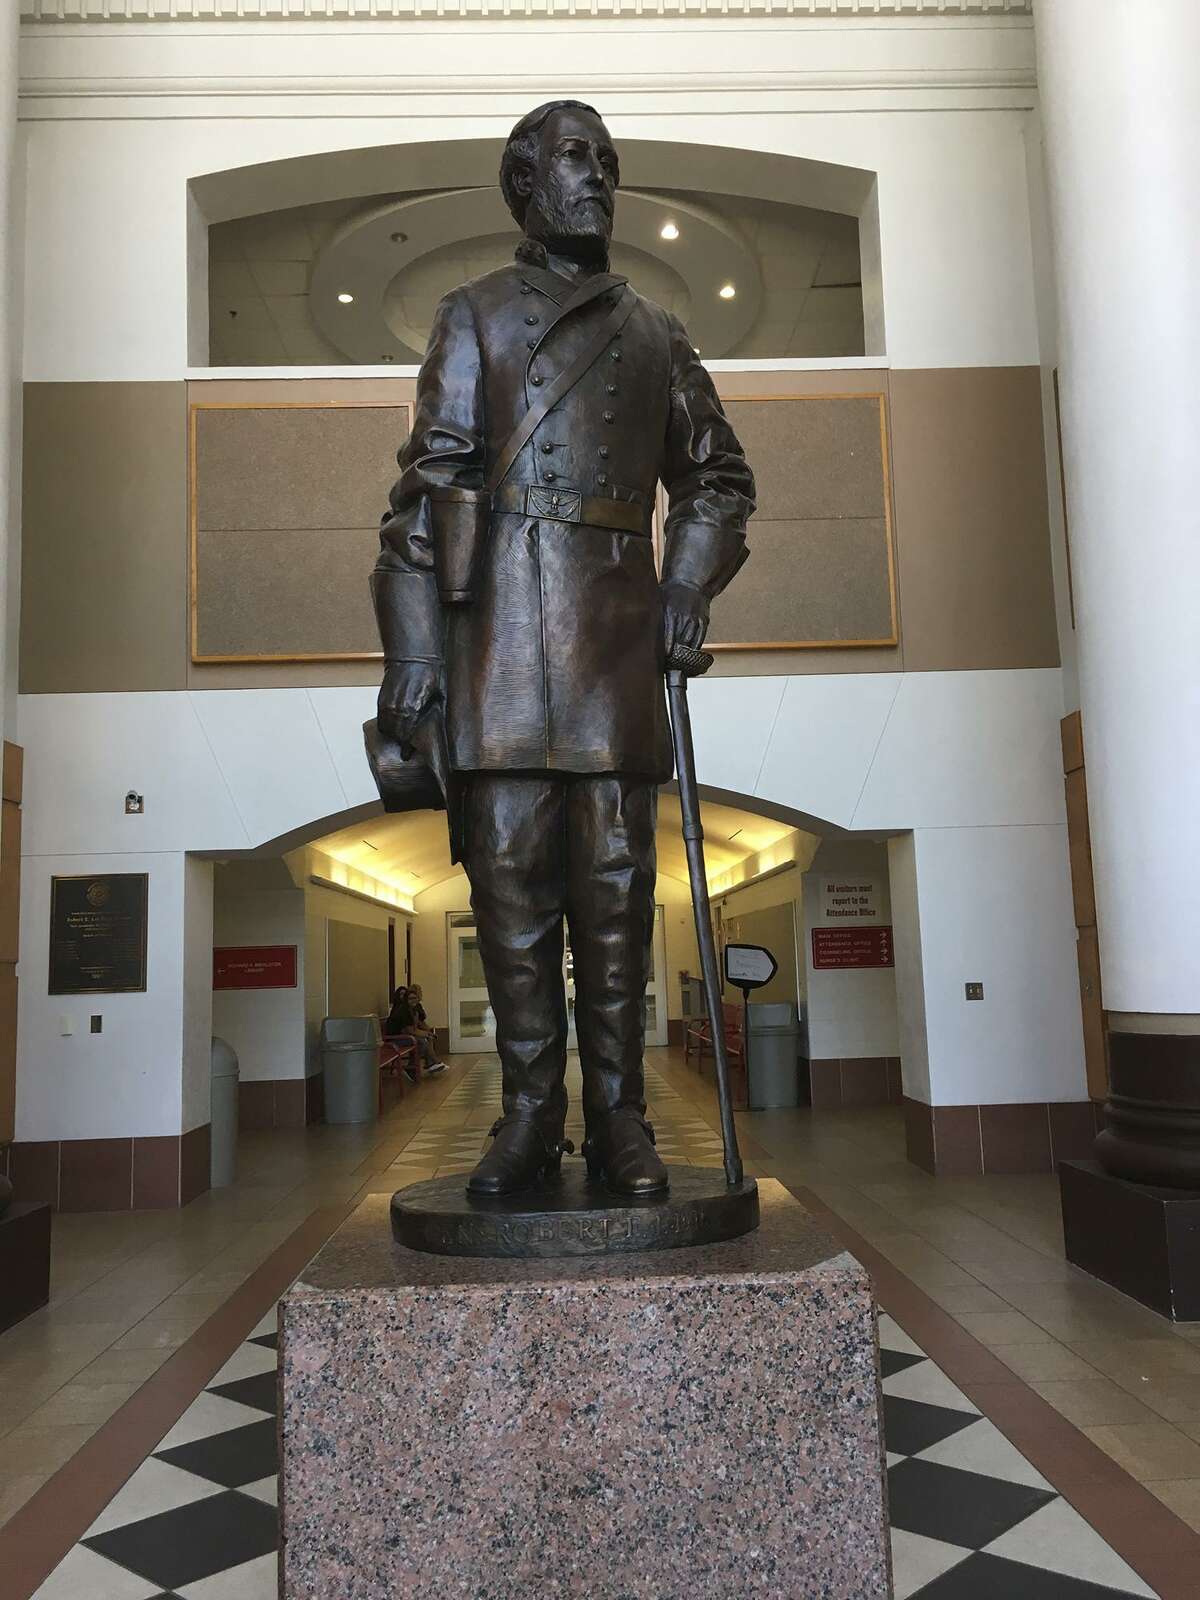 The statue of Confederate Gen. Robert E. Lee in the main entry foyer of Lee High School in San Antonio’s North East Independent School District.